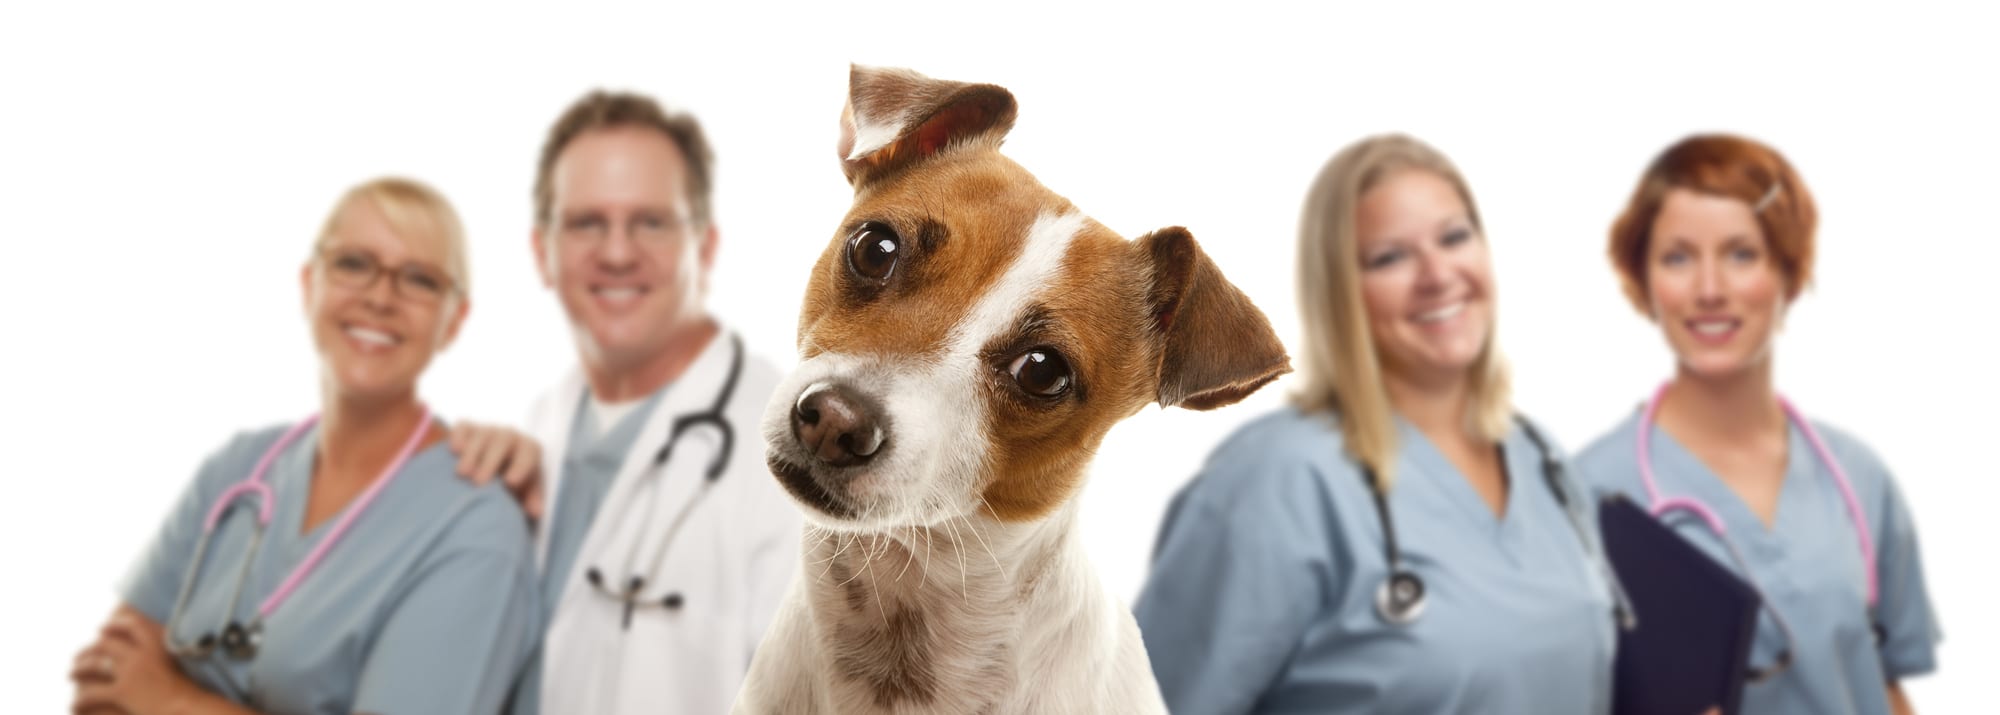 answering service for veterinarians